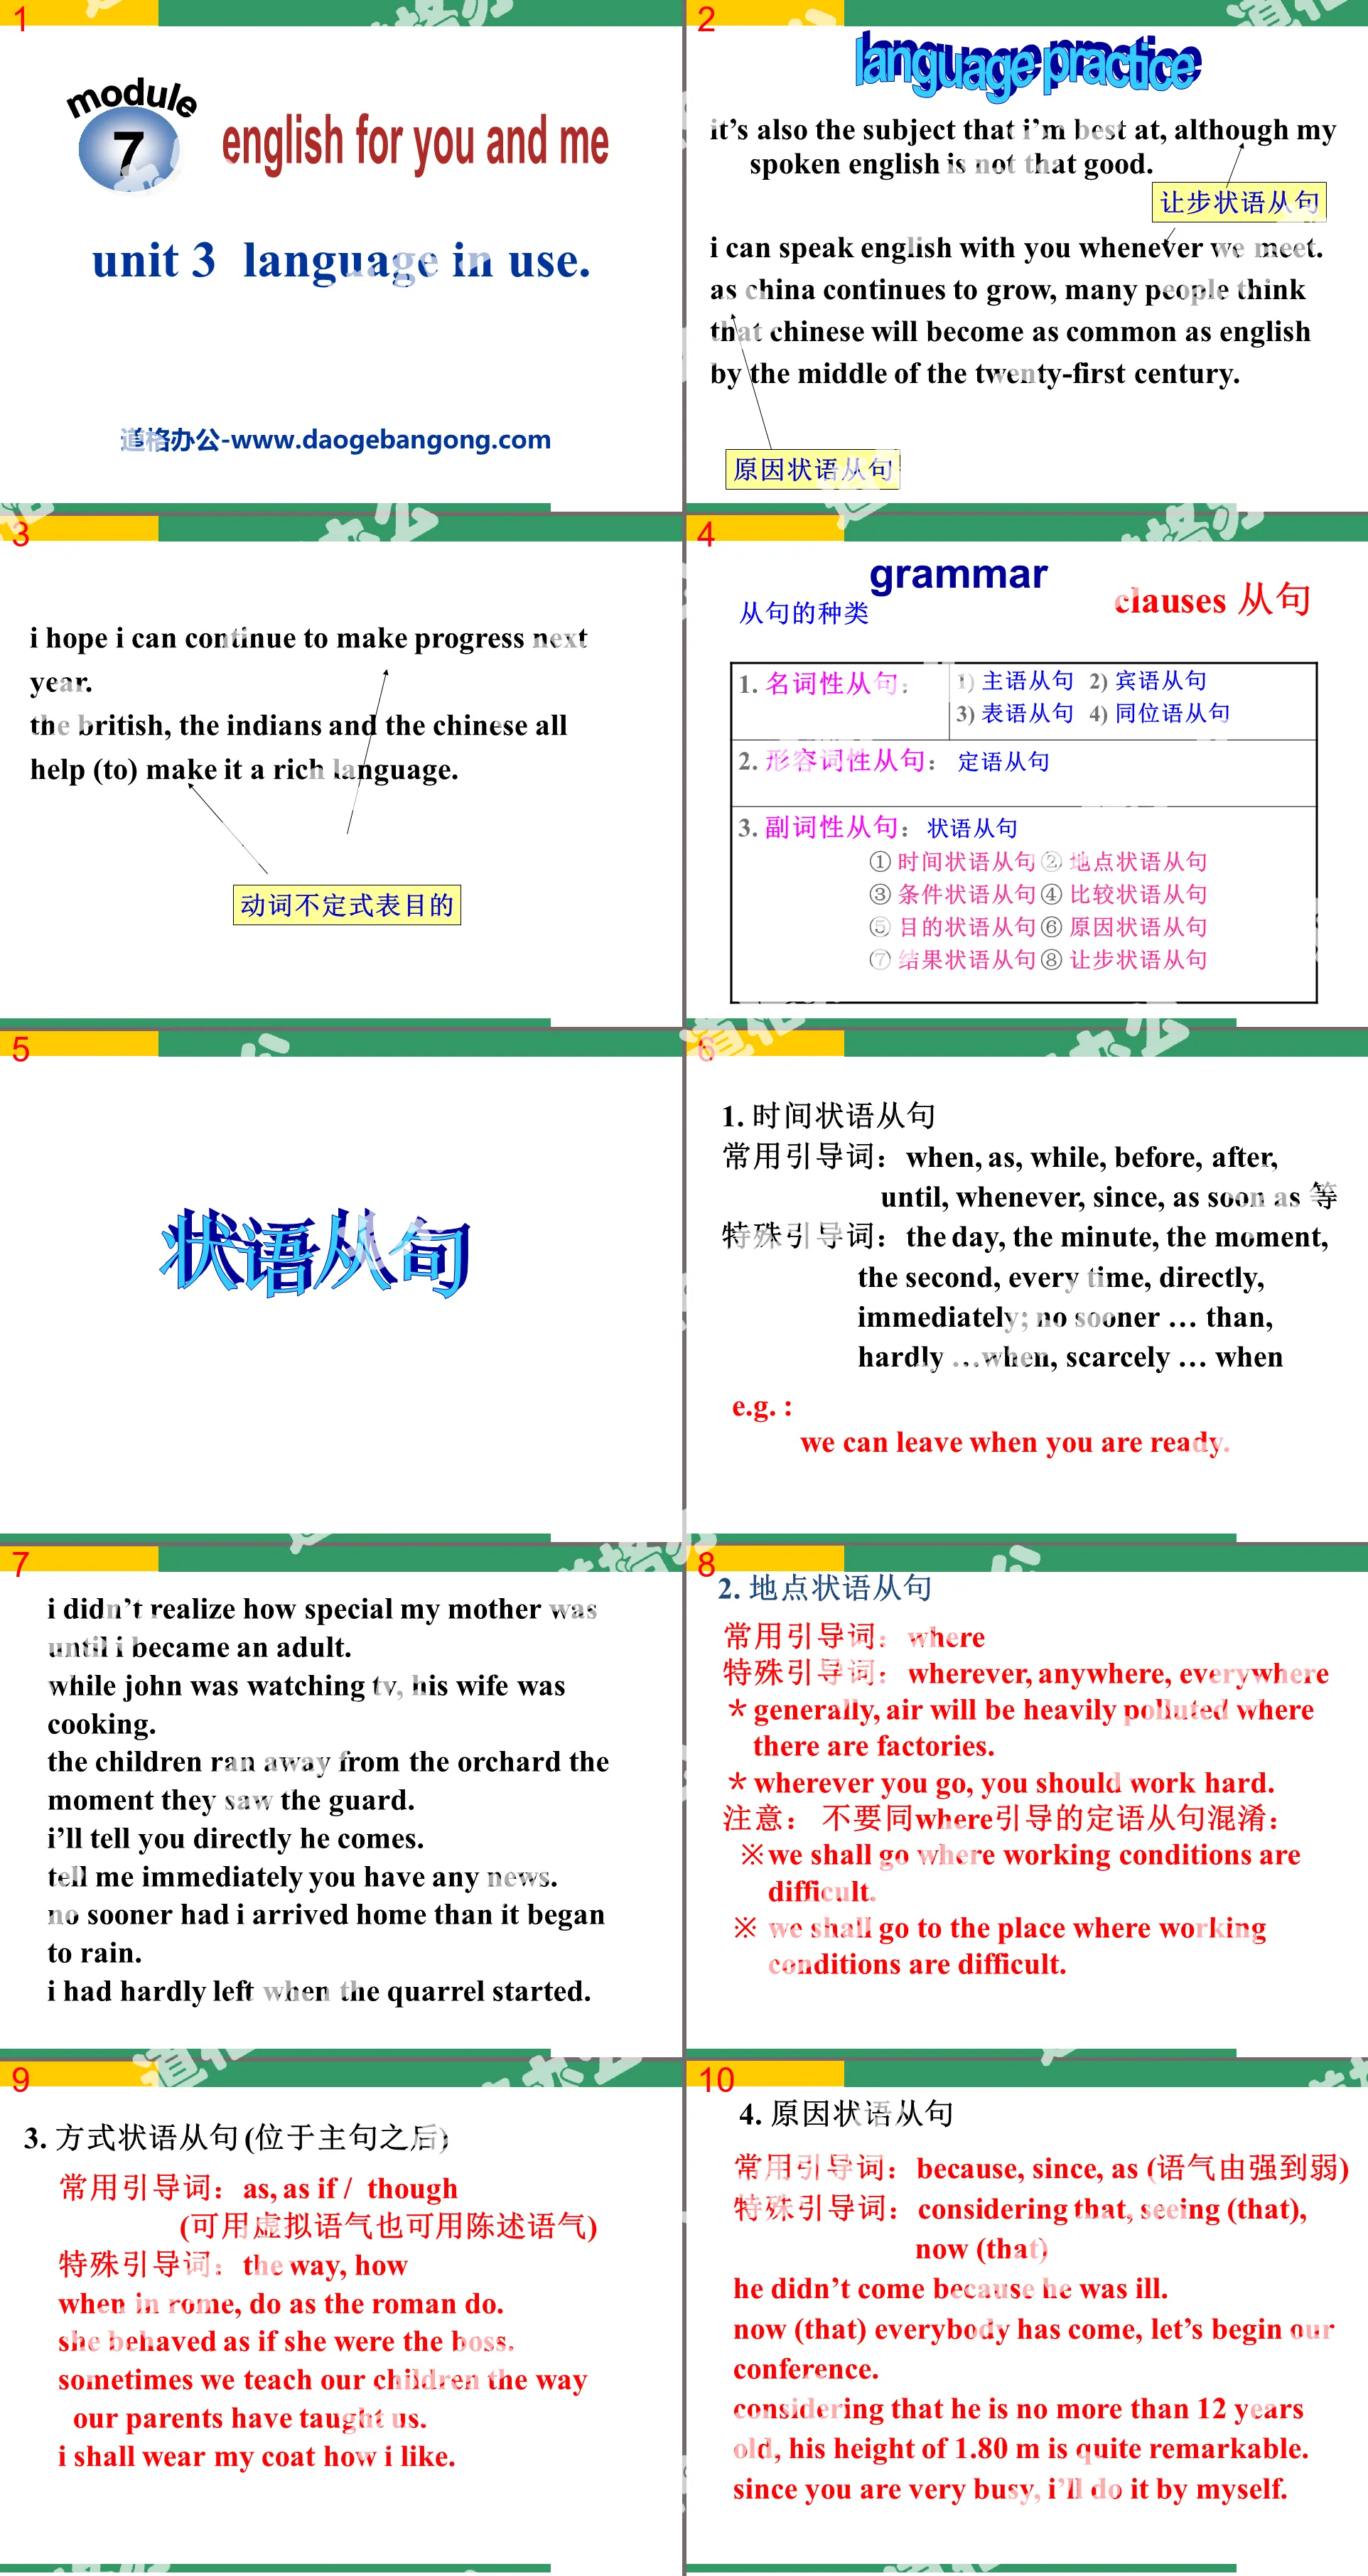 《Language in use》English for you and me PPT課件2